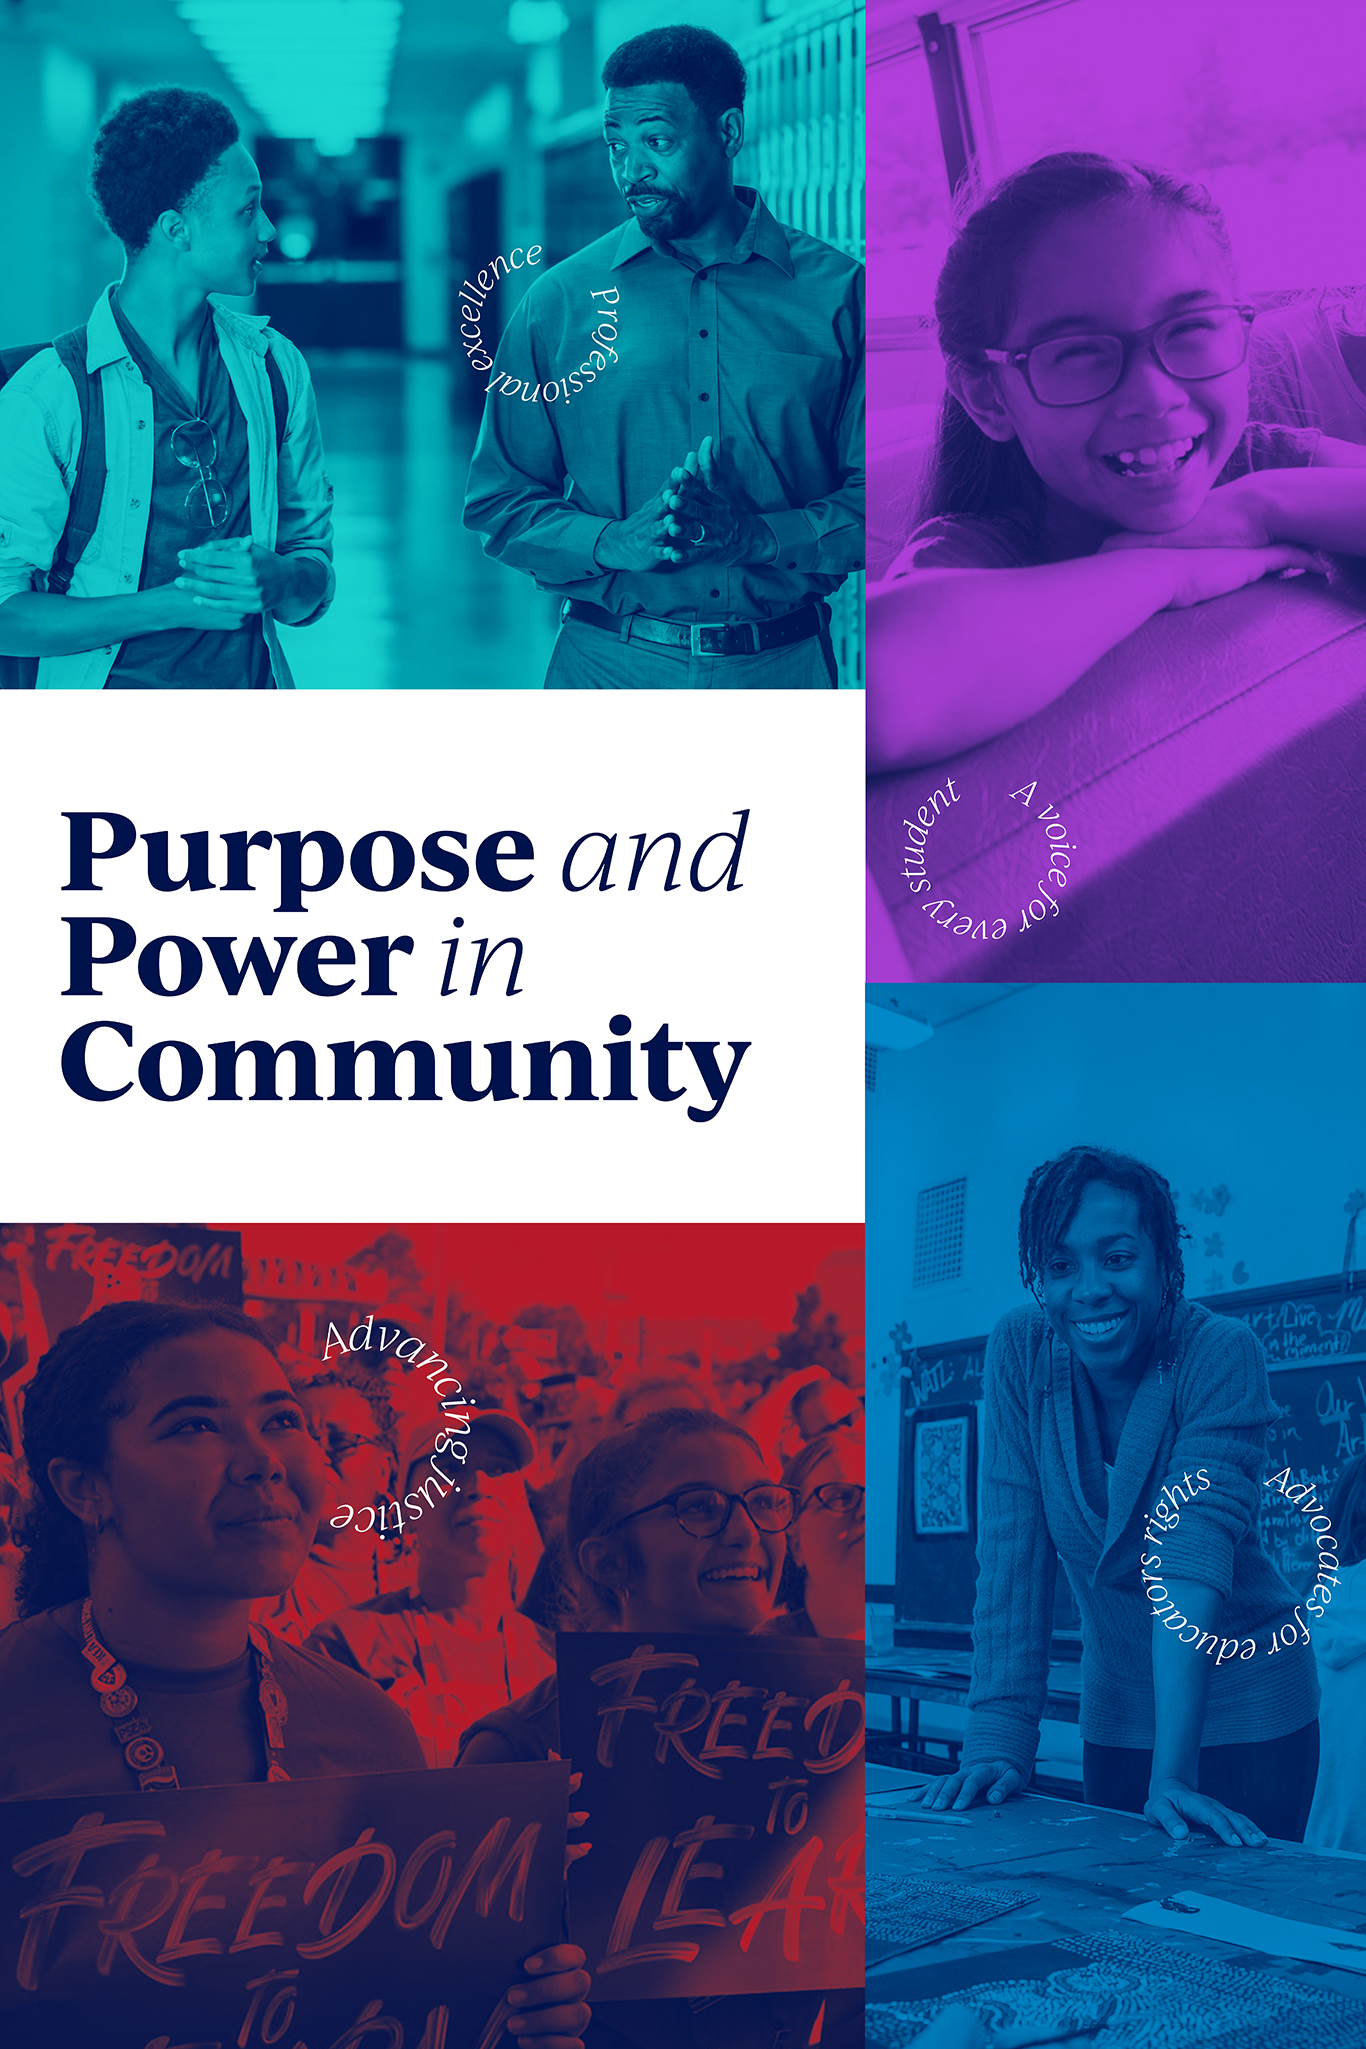 A poster with four monochrome images in teal, purple, blue, and red featuring multiracial people smiling, protesting and talking with dark blue text that reads “Purpose and power in community” and white curved text that reads “professional excellence”, “a voice for every student”, “advocates for educators rights”, and “advancing justice”.